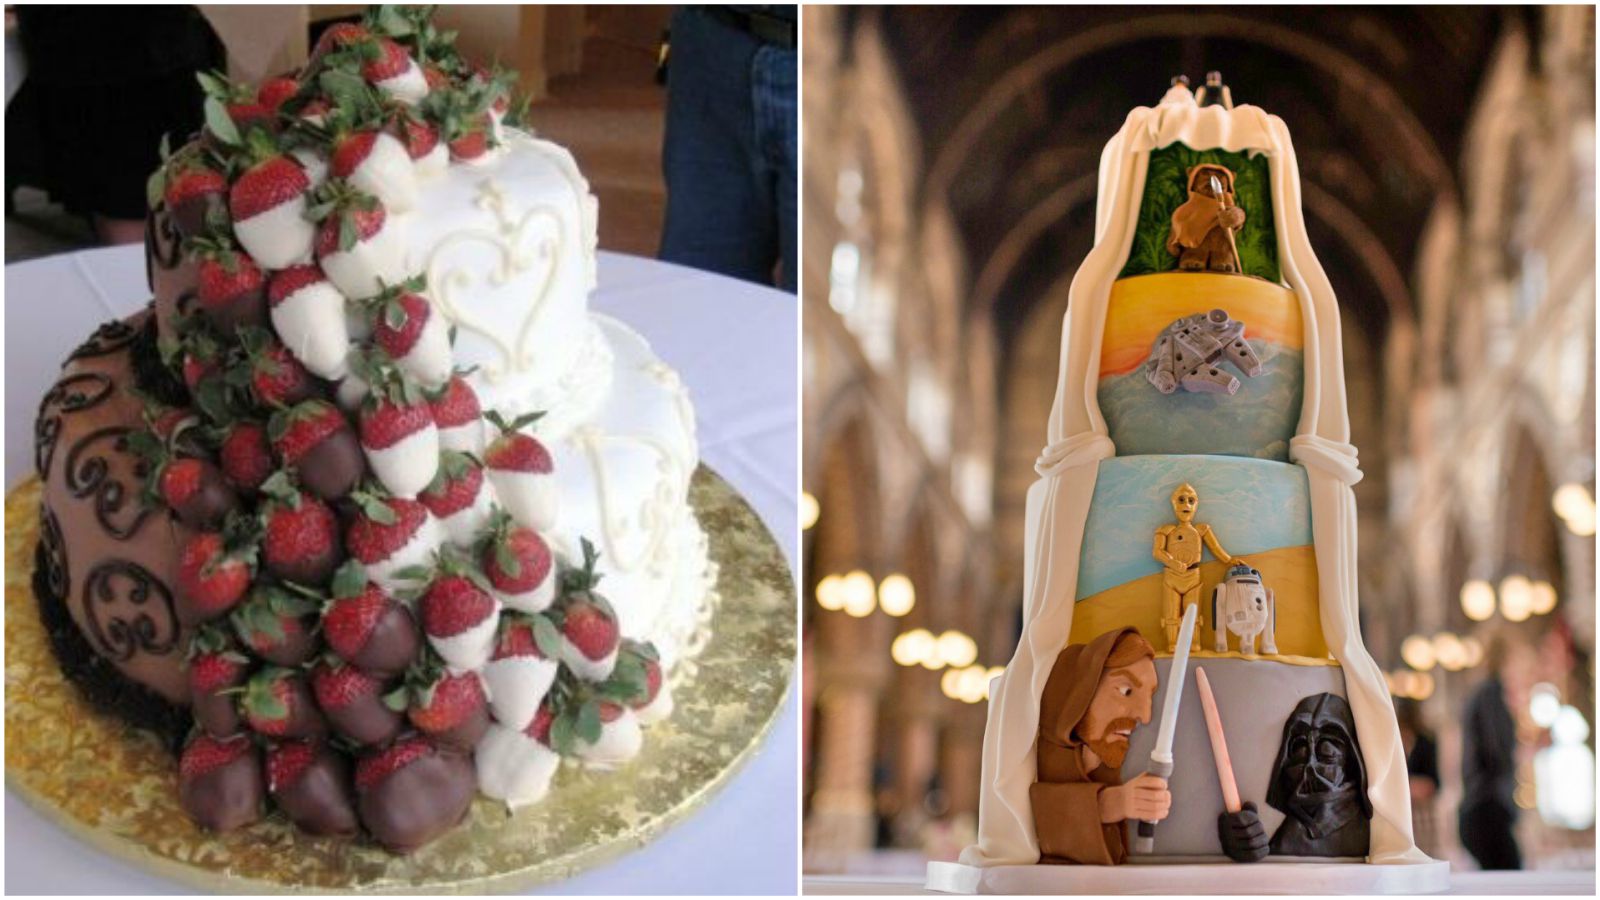 12 Creative Wedding Cake Ideas for the Bride and Groom